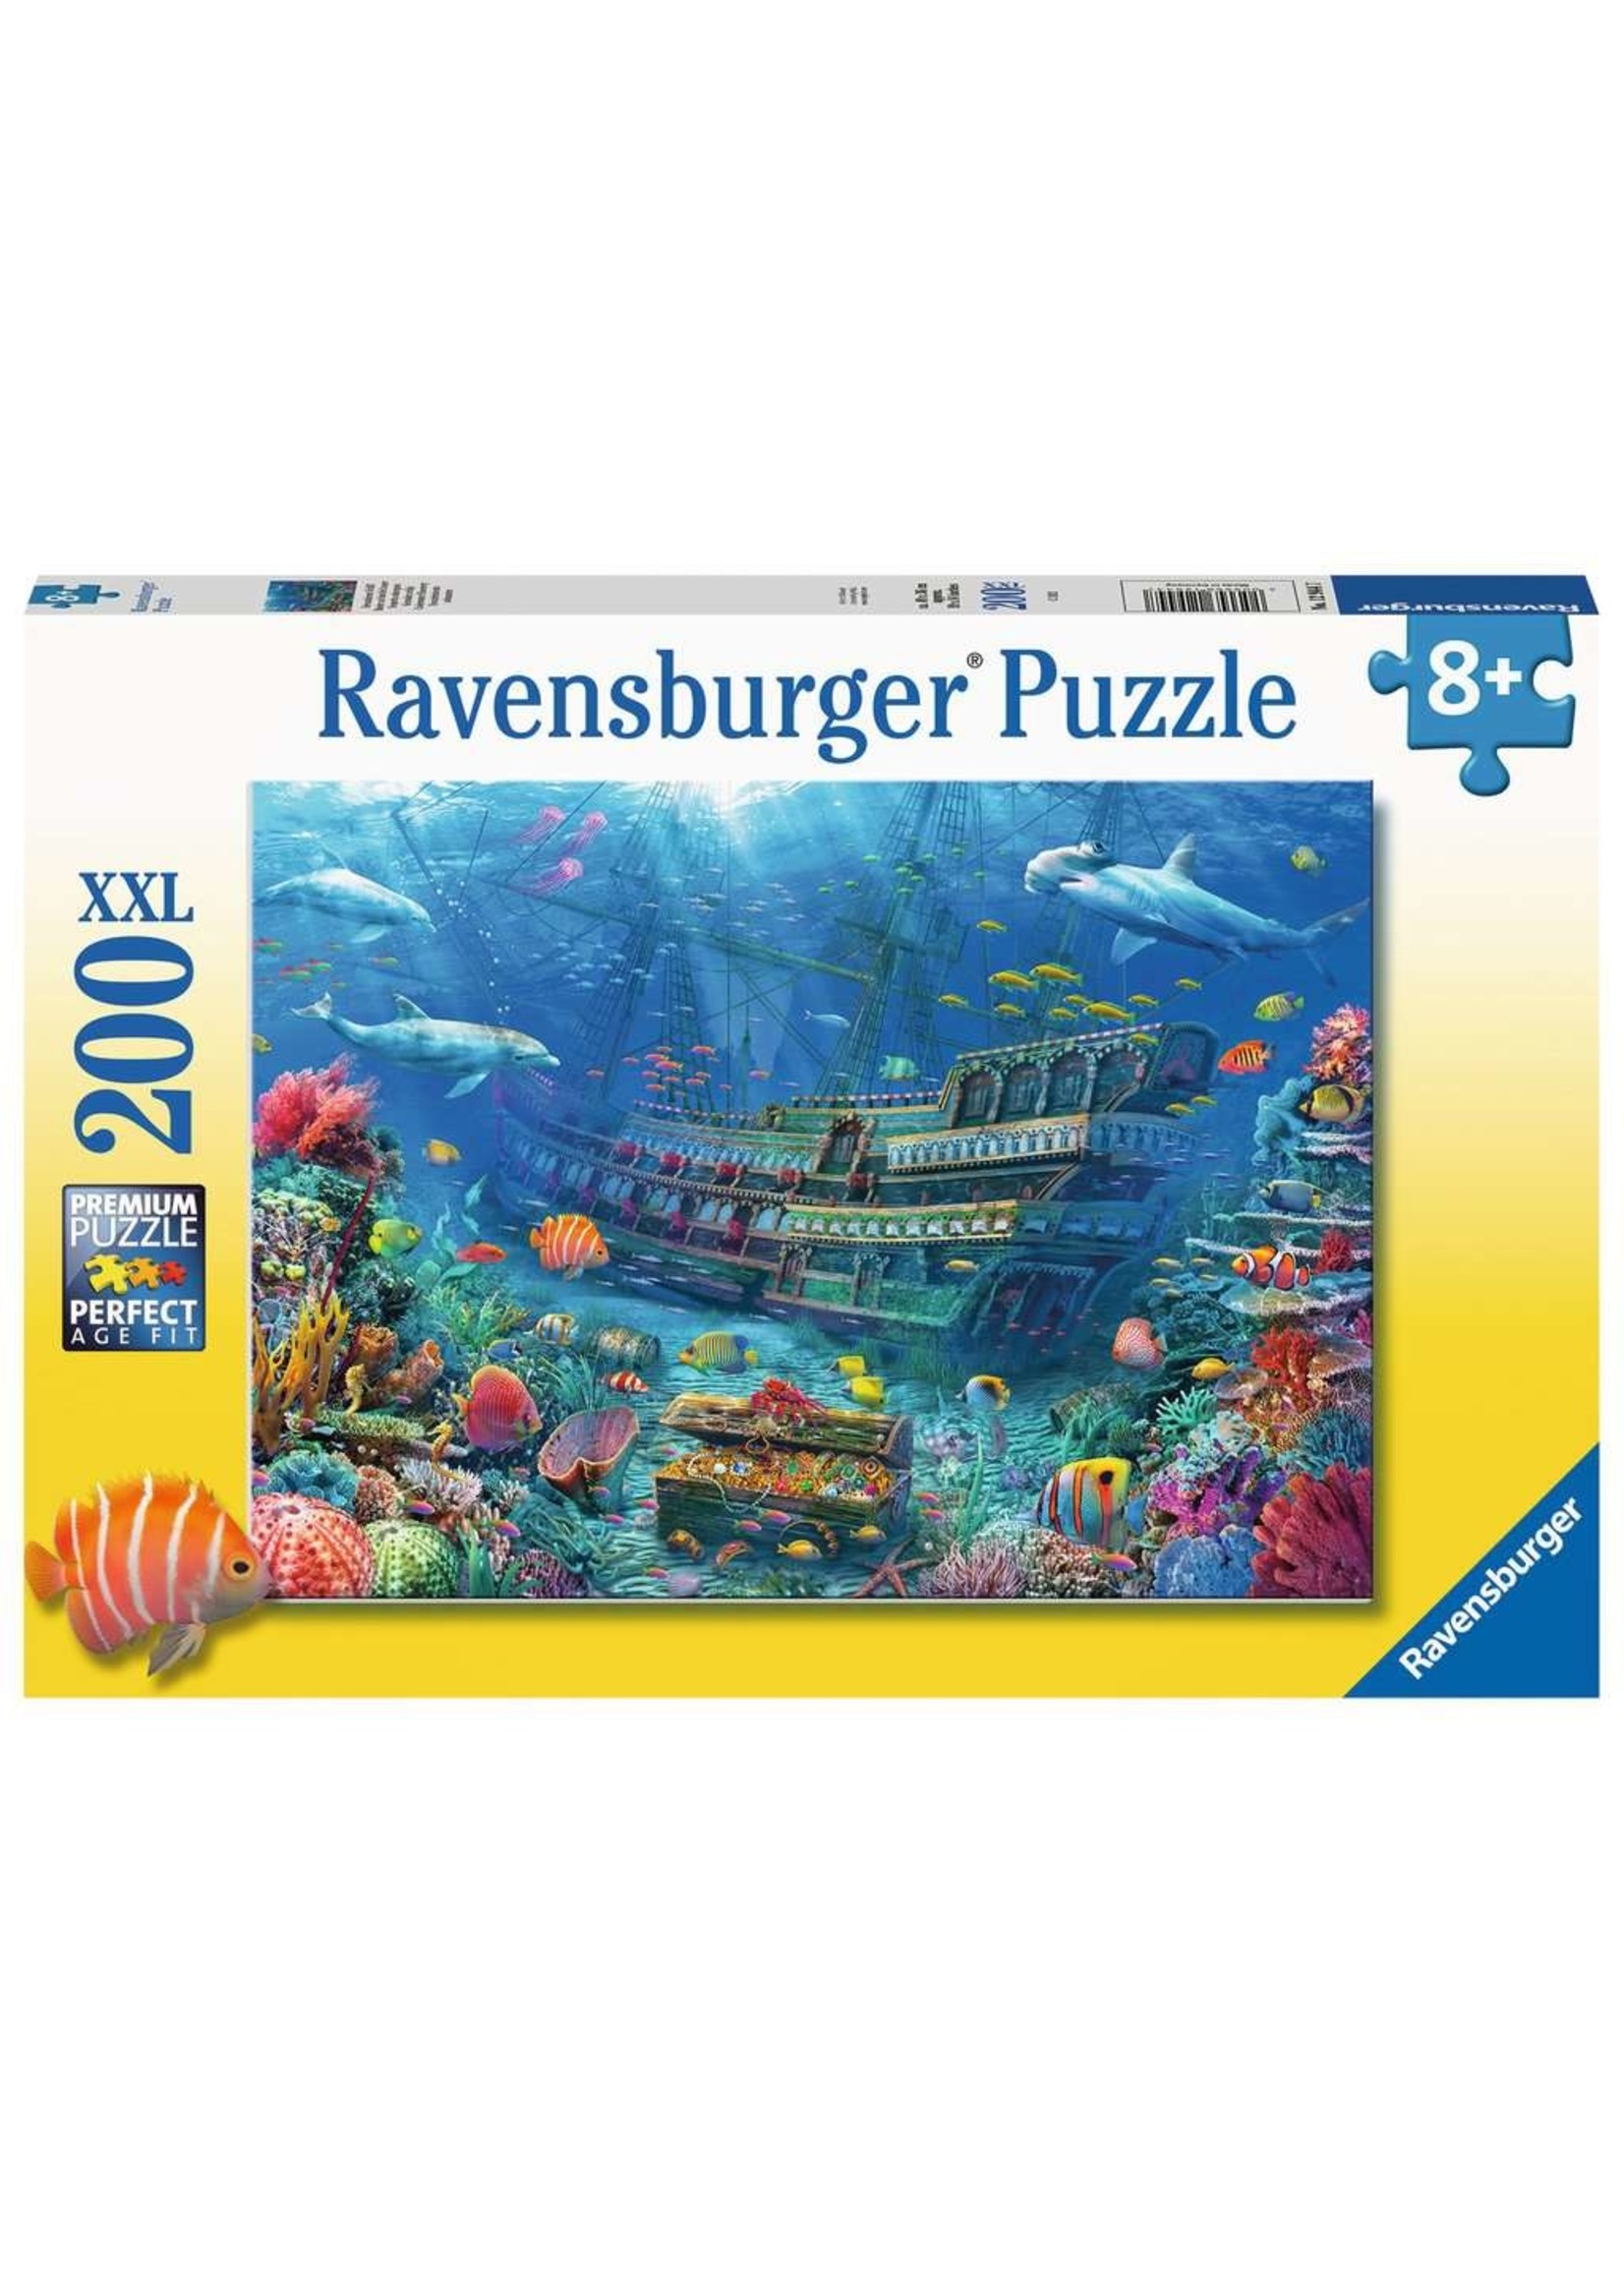 Ravensburger "Underwater Discovery" 200 Piece Puzzle